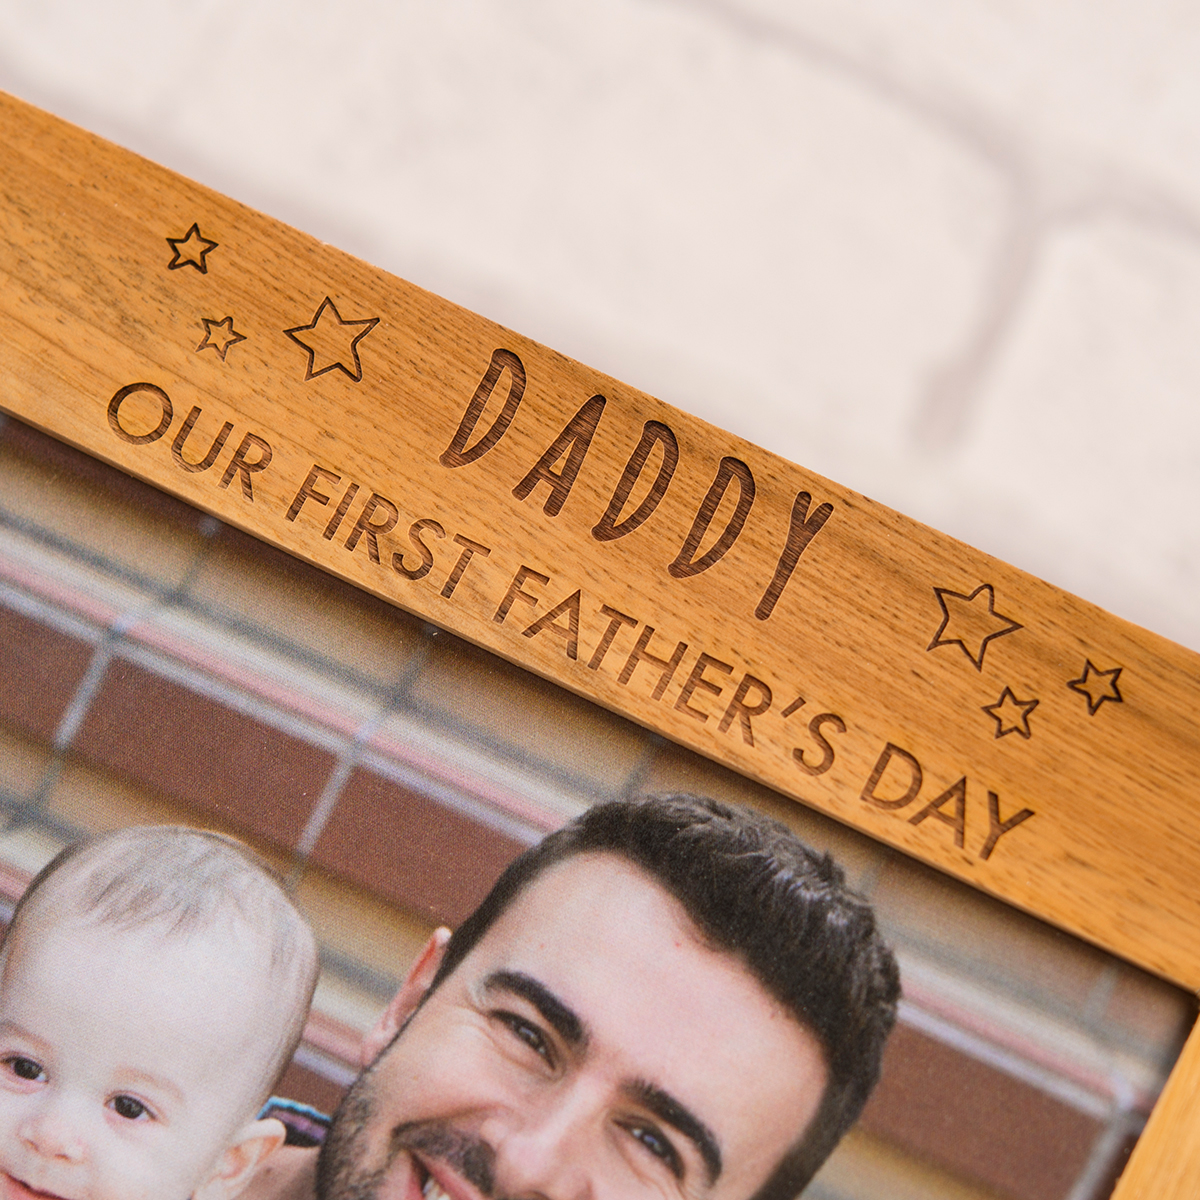 Engraved Wooden Picture Frame - Our First Father's Day